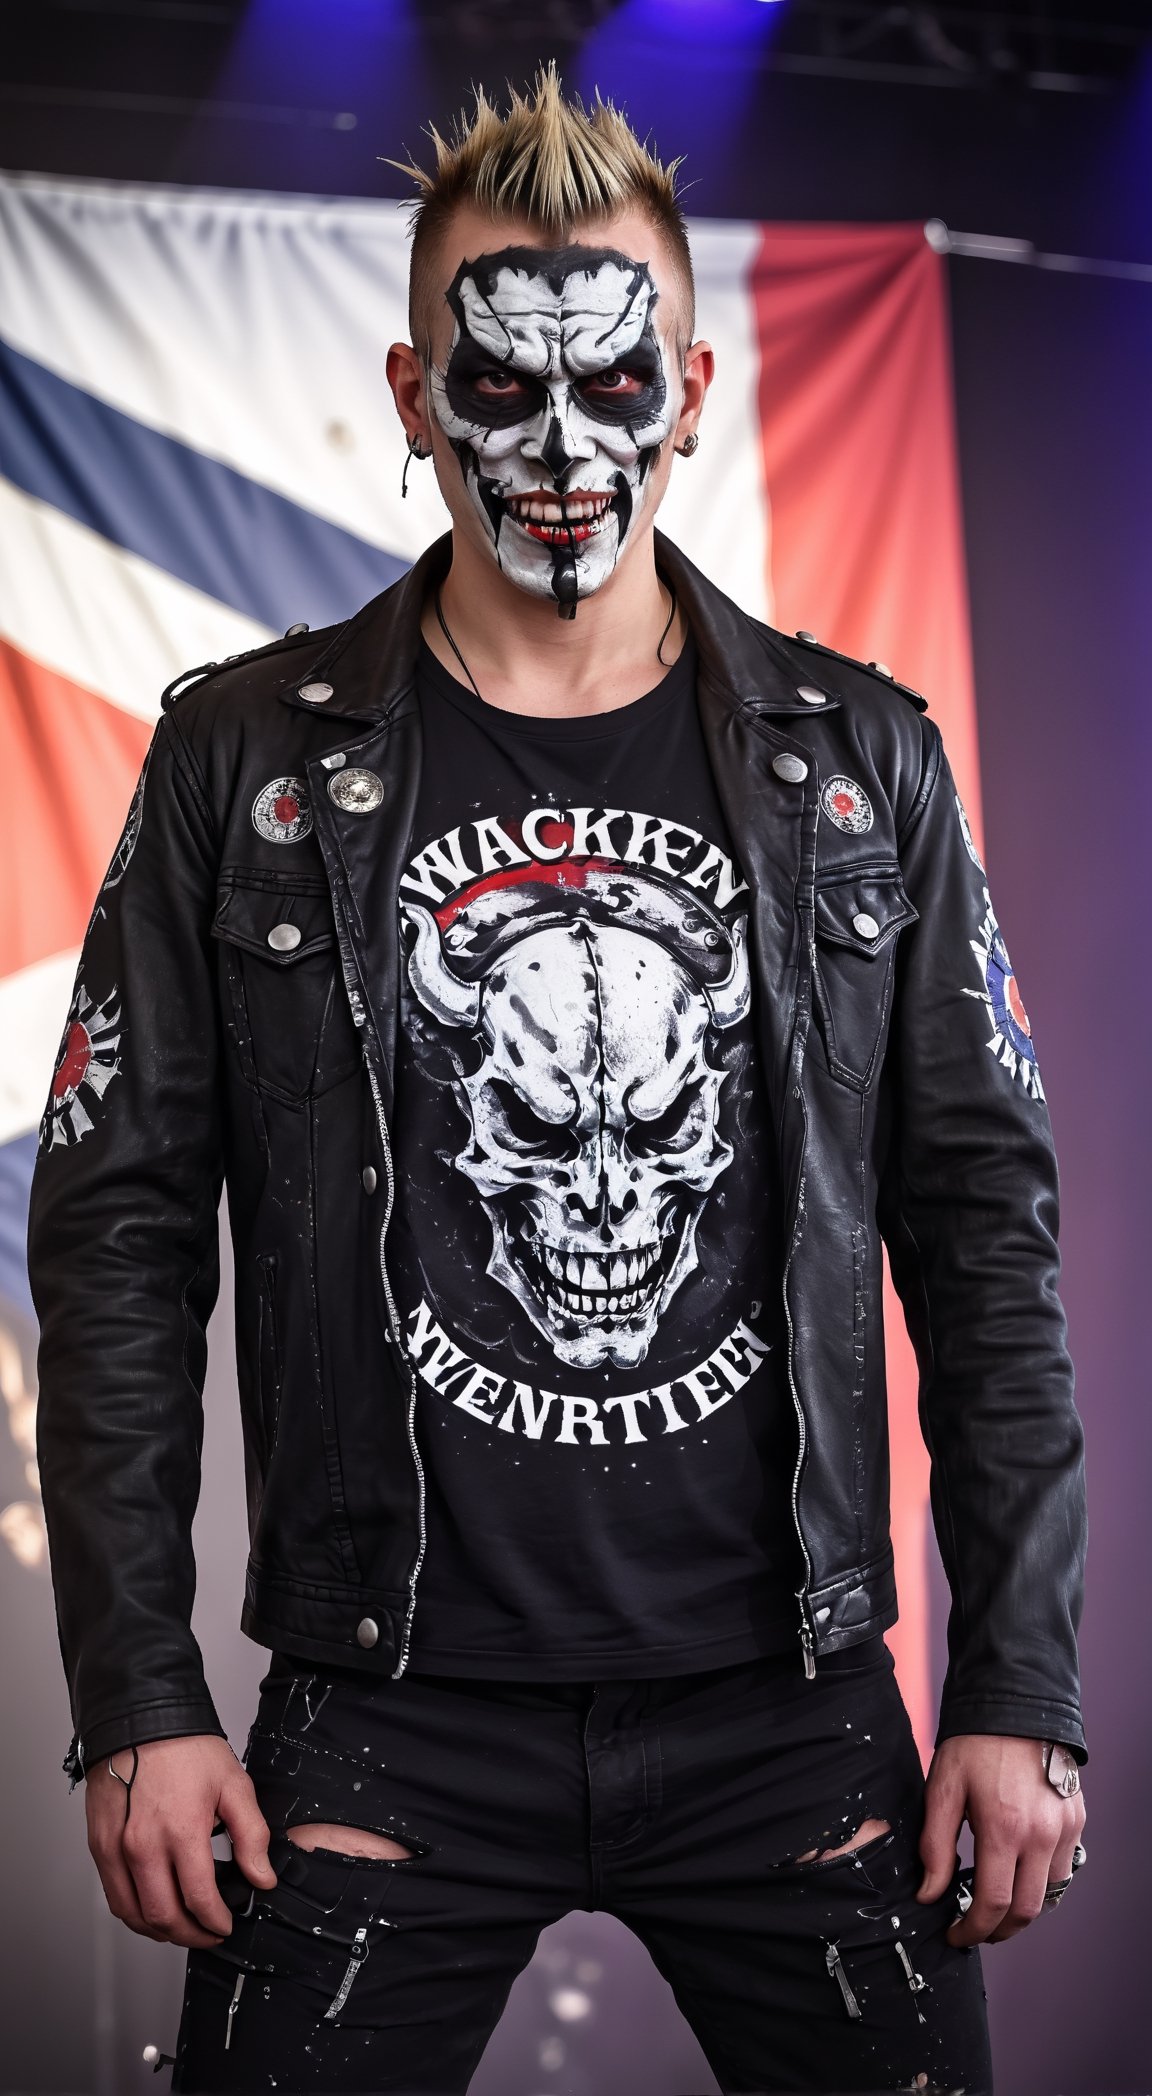 cowboy shotrockstar wearing a Hannya mask while standing on stage, 
Septum Piercing, more Coal,  More patchs, Crust core, anti union flag design, dirty torn studded Spikes leather jacket, 
Wacken Shirt,
hardcore Punk Style jacket,black DressShirt, lot Punk badge,military boots,
